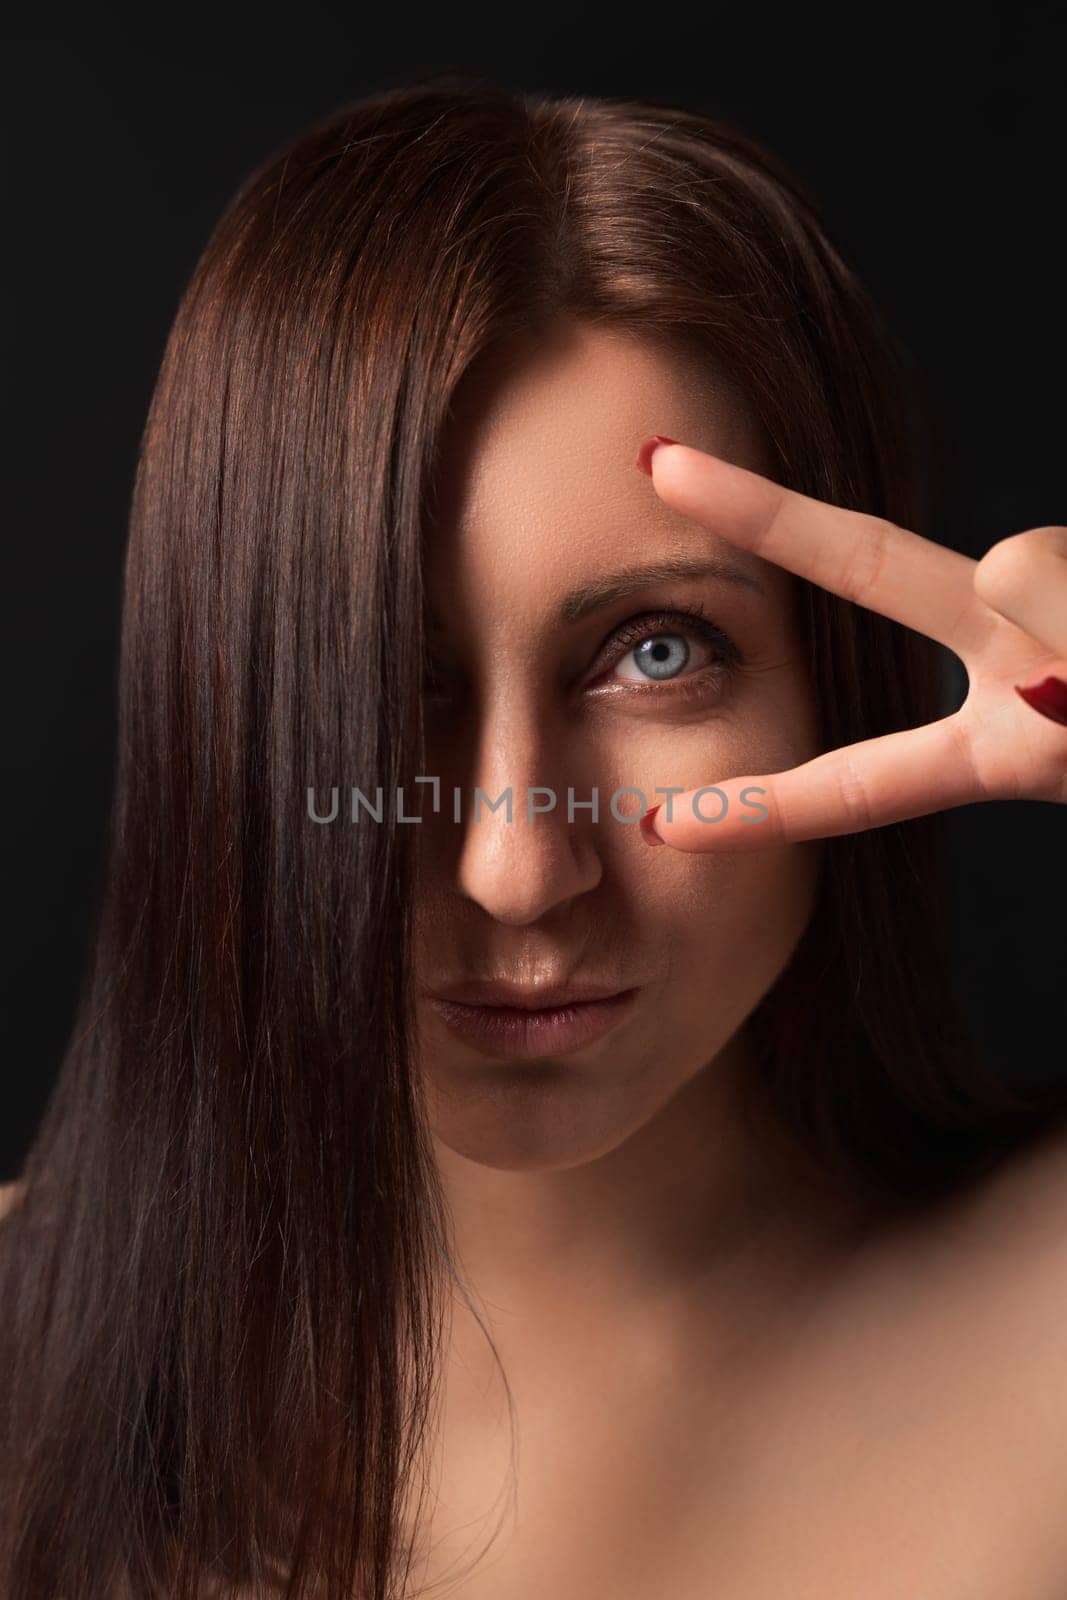 Portrait of nice adult lady showing victory sign near eye and looking at camera. Lovely Caucasian ethnicity brunette woman with long hair covering one eye and outstretched lips on black background.